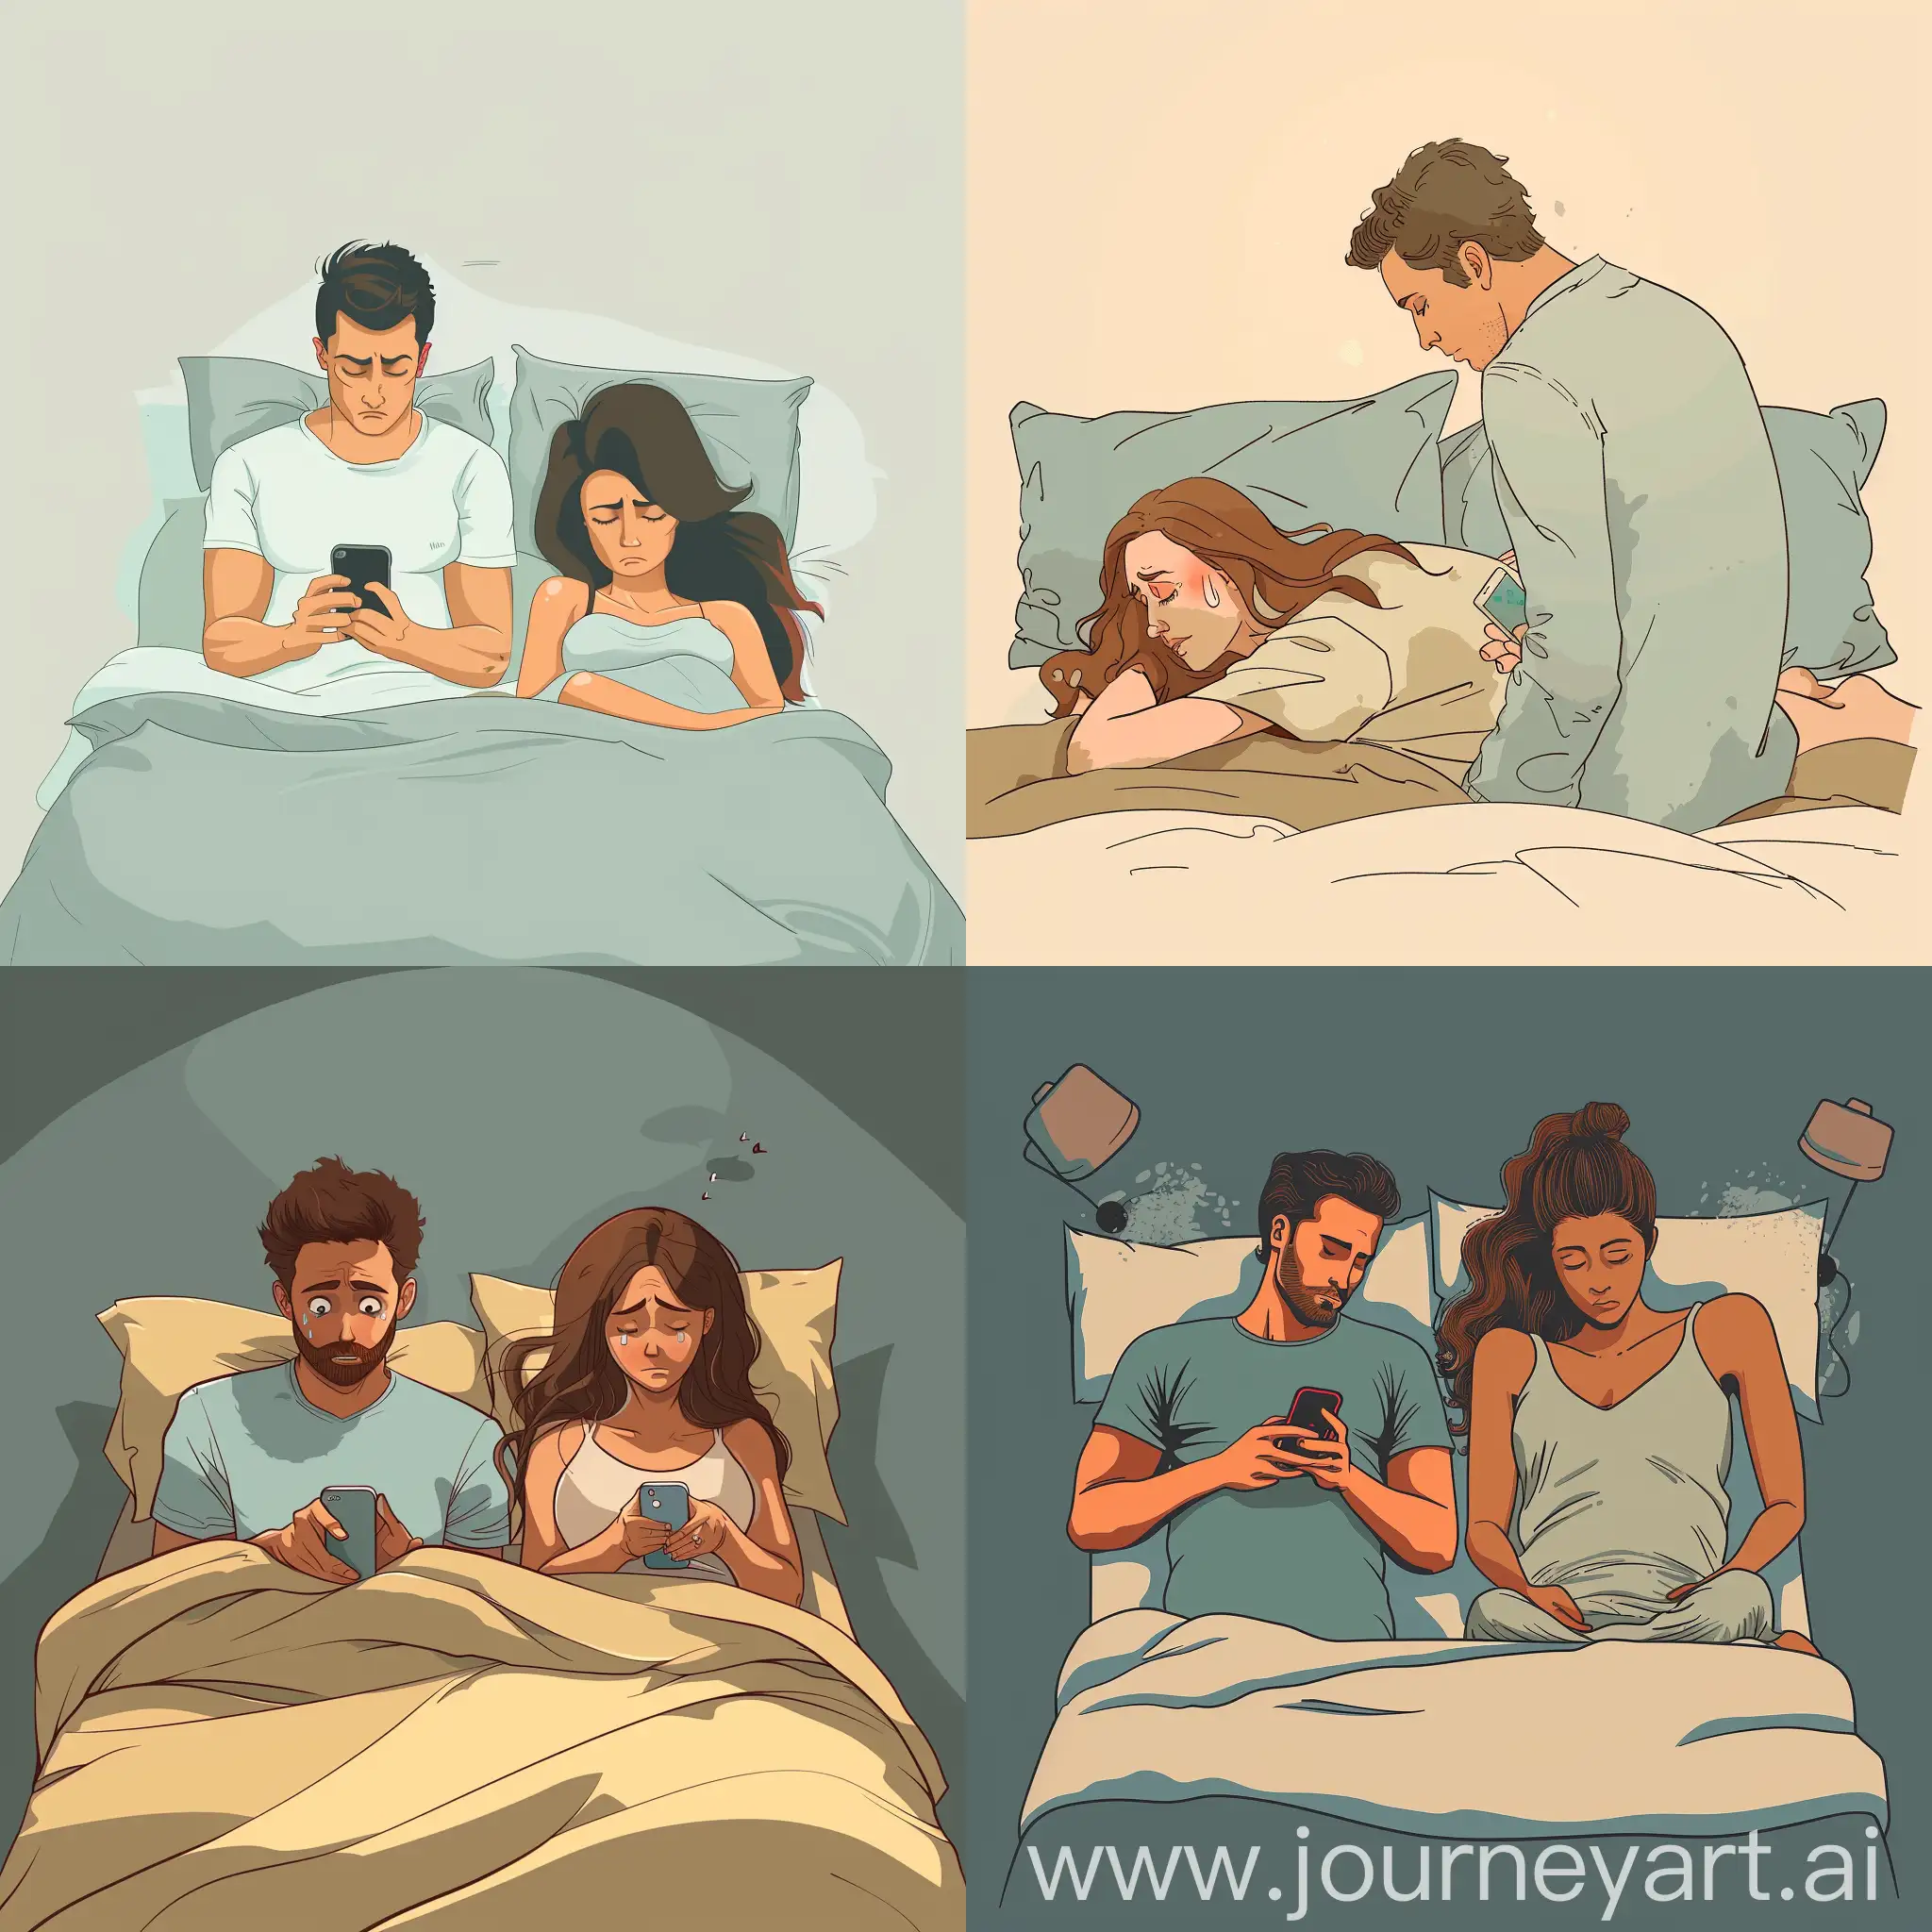 Marital-Disconnect-Husband-Engrossed-in-Phone-While-Wife-Feels-Neglected